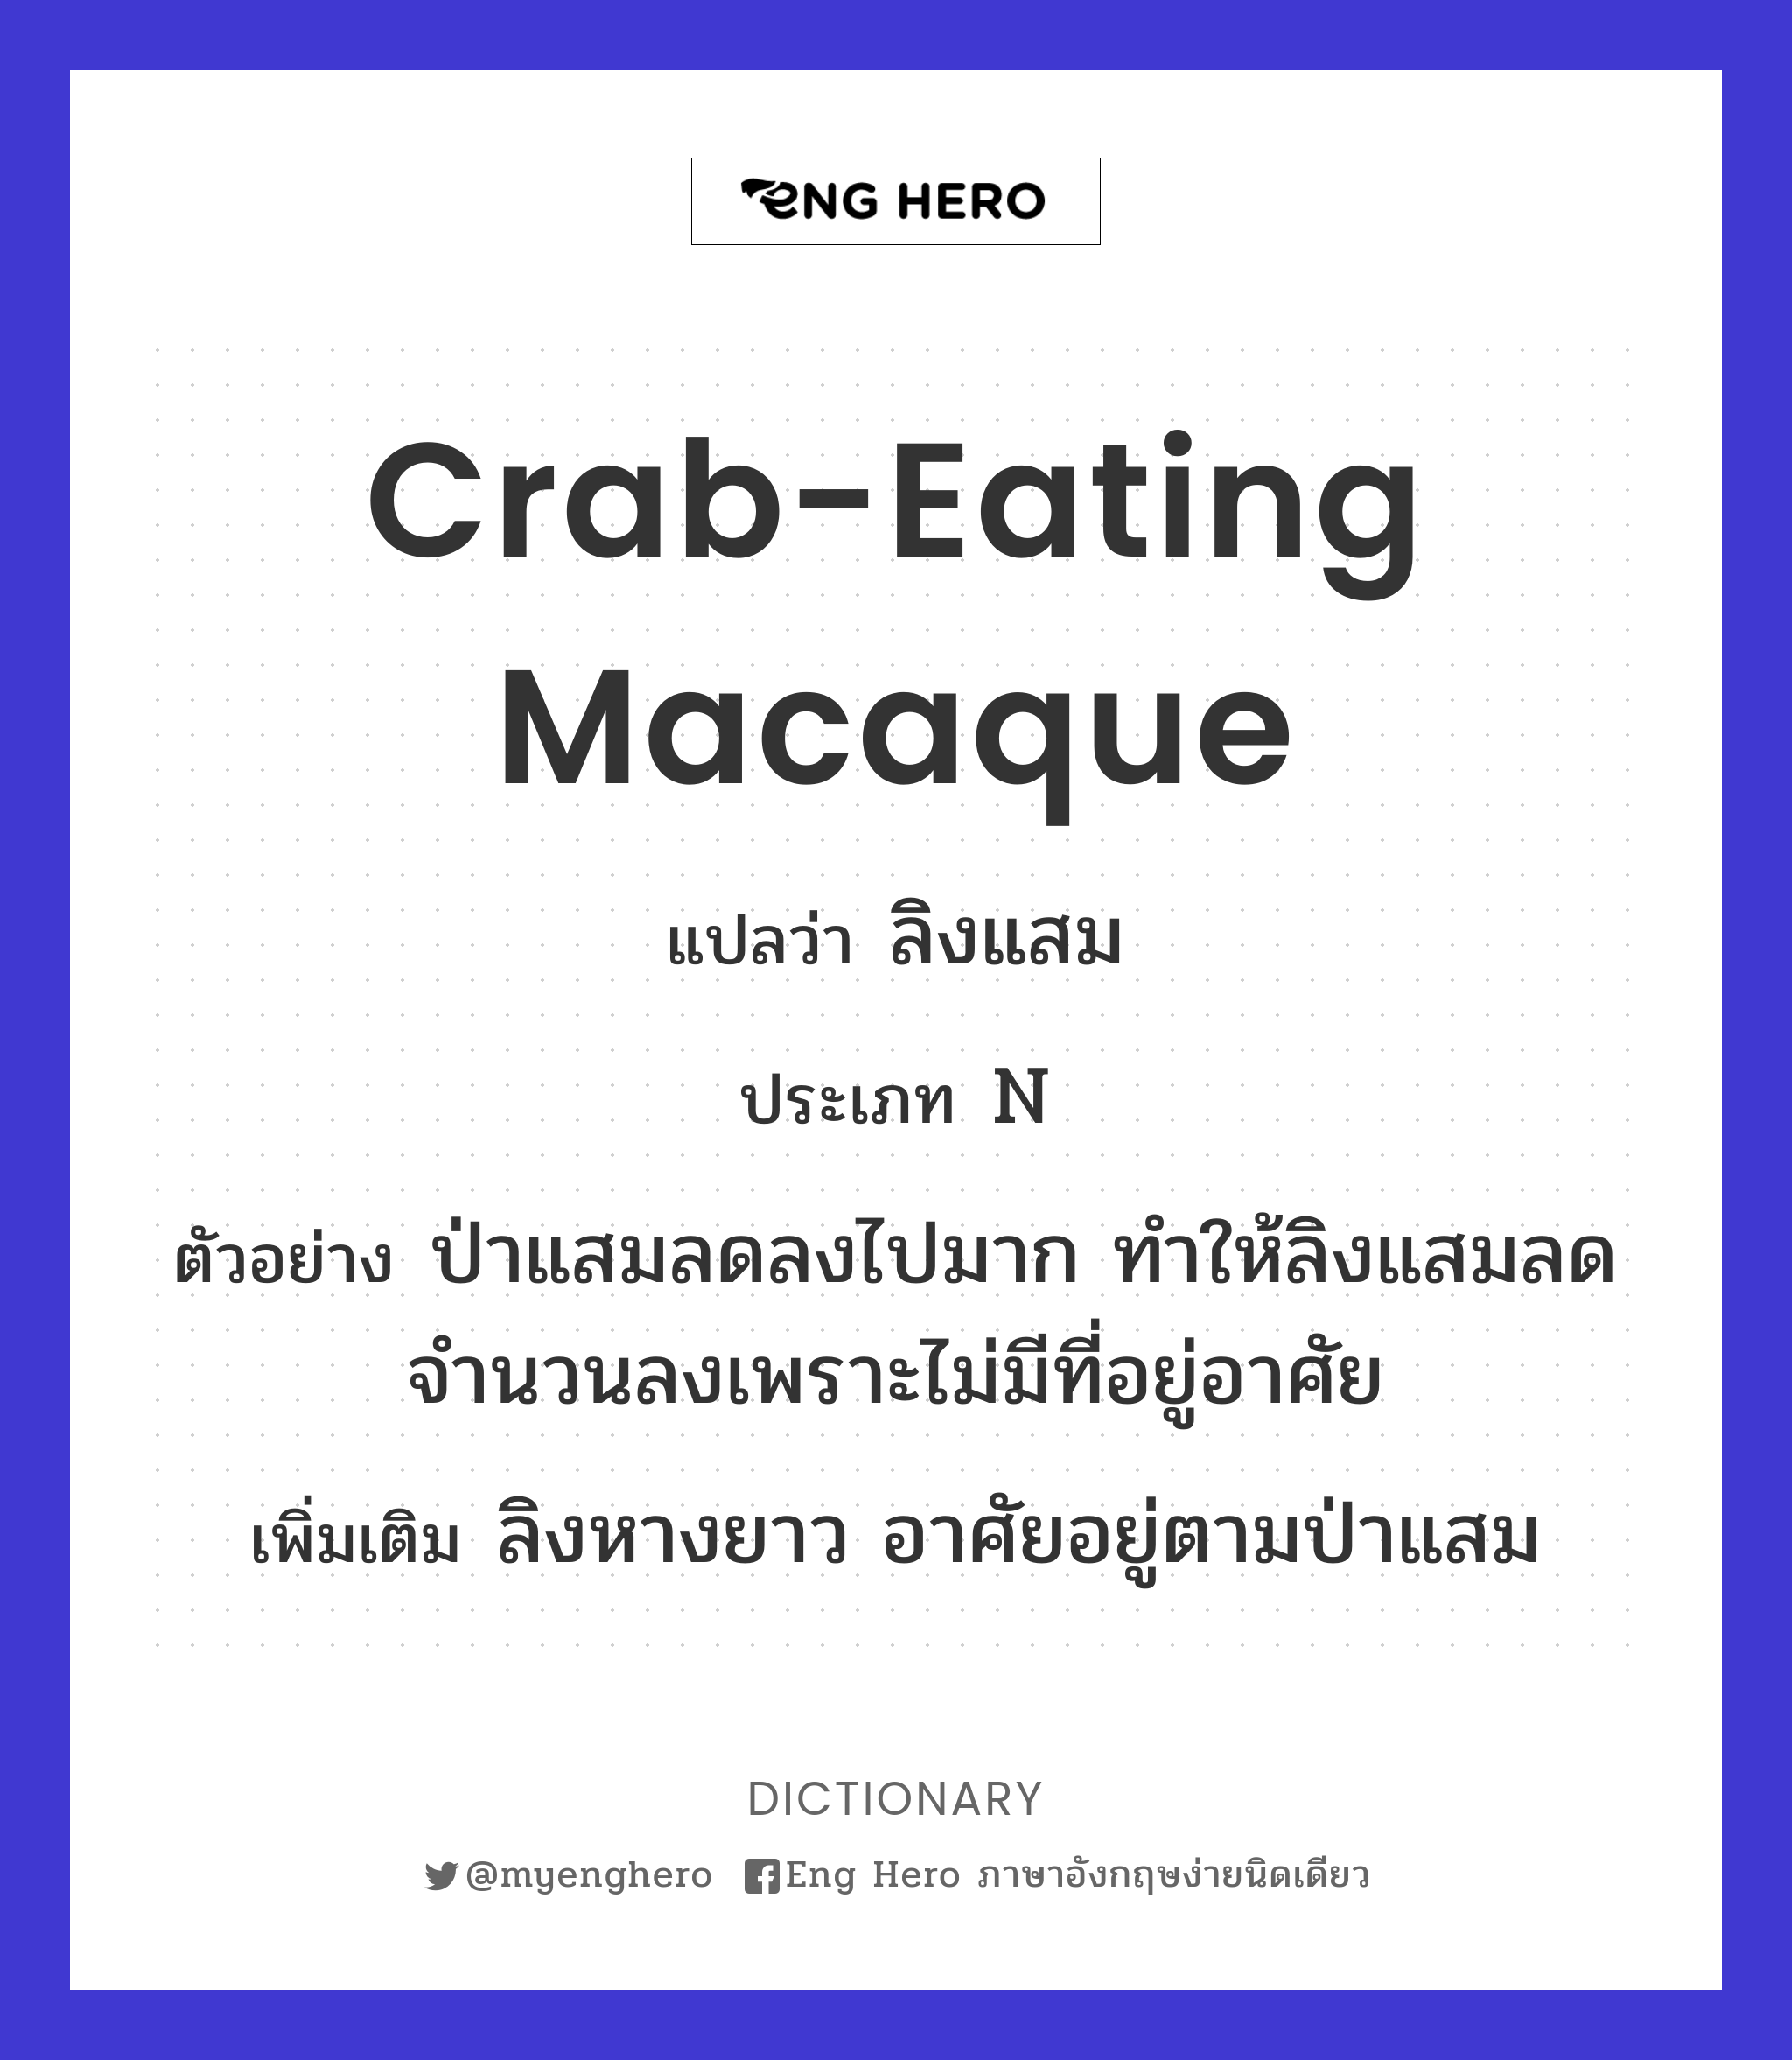 crab-eating macaque